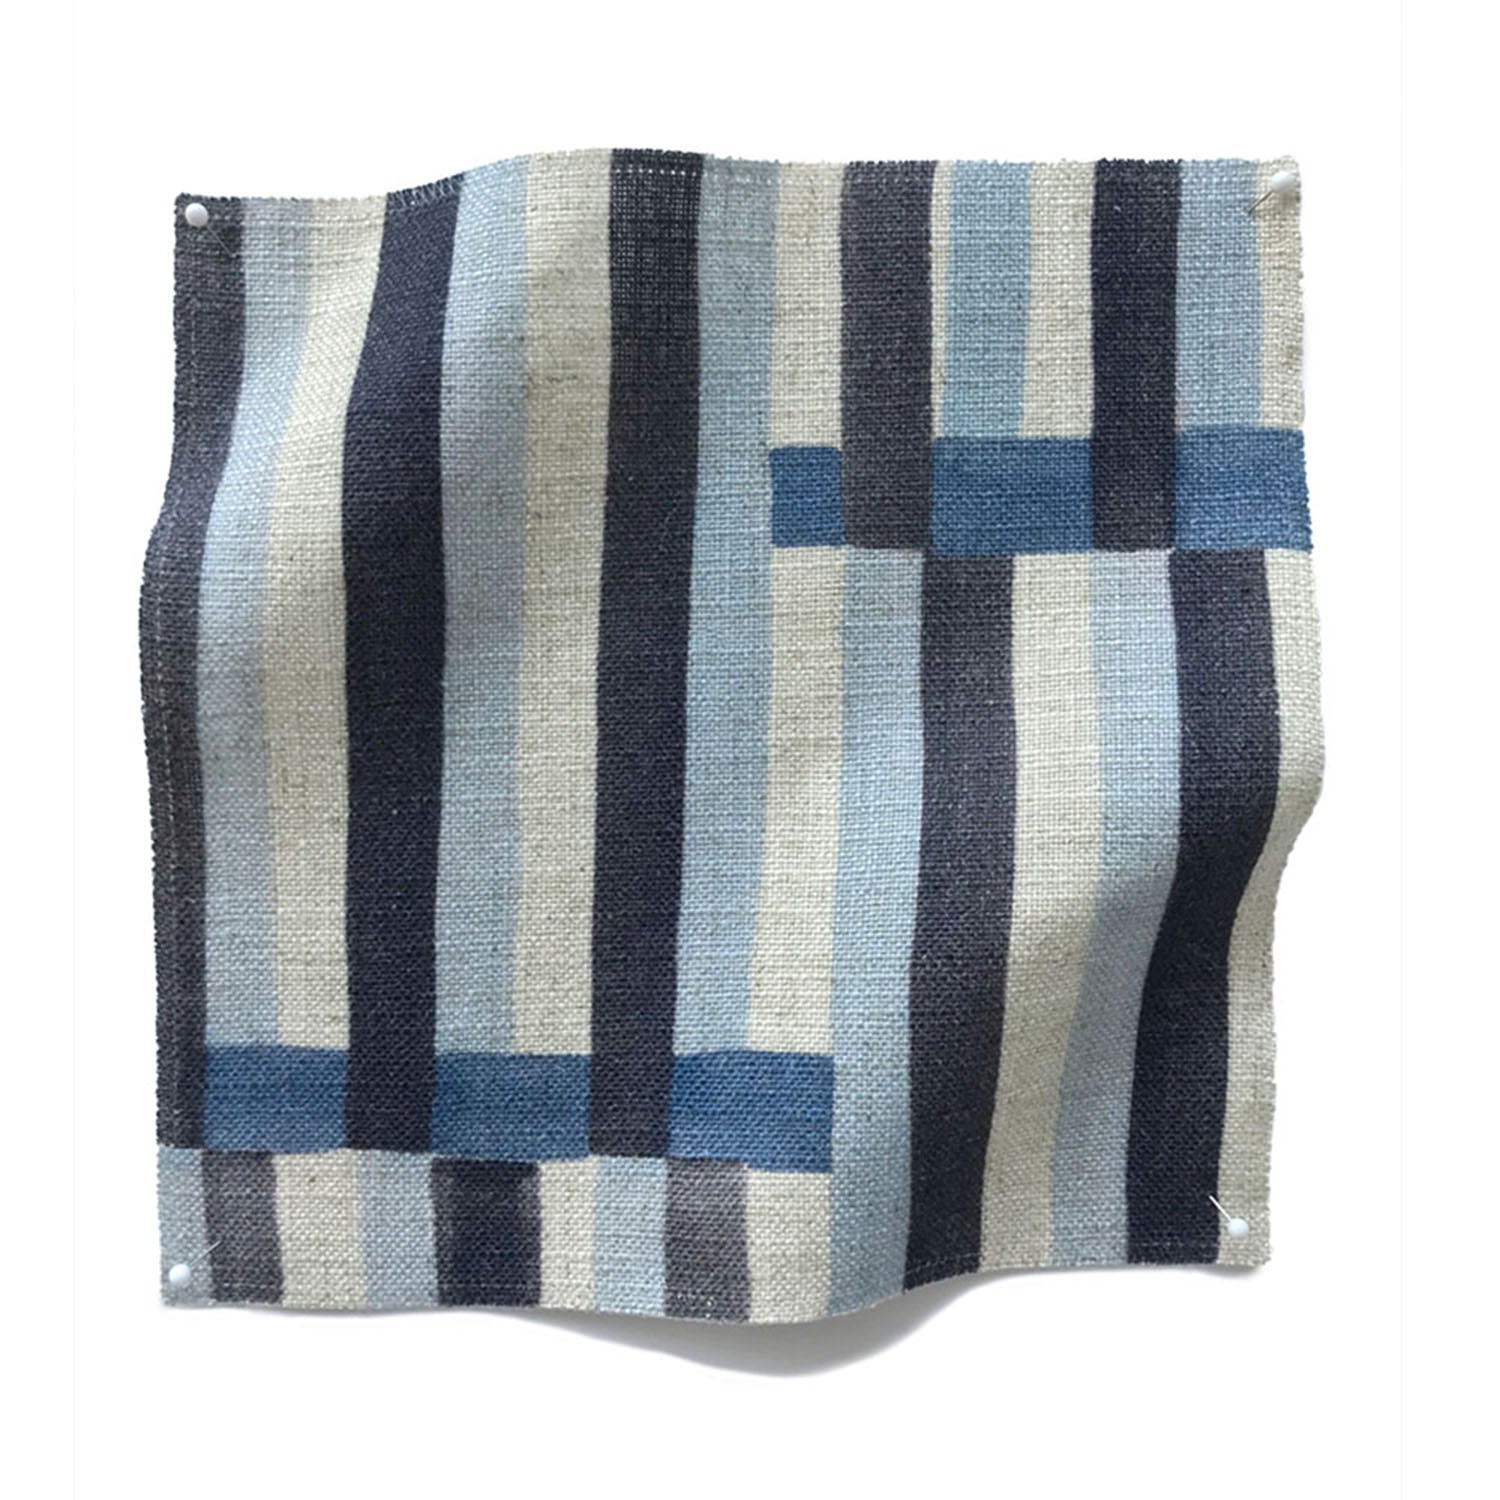 Square fabric swatch in an interlocking striped pattern in shades of blue, navy and cream.